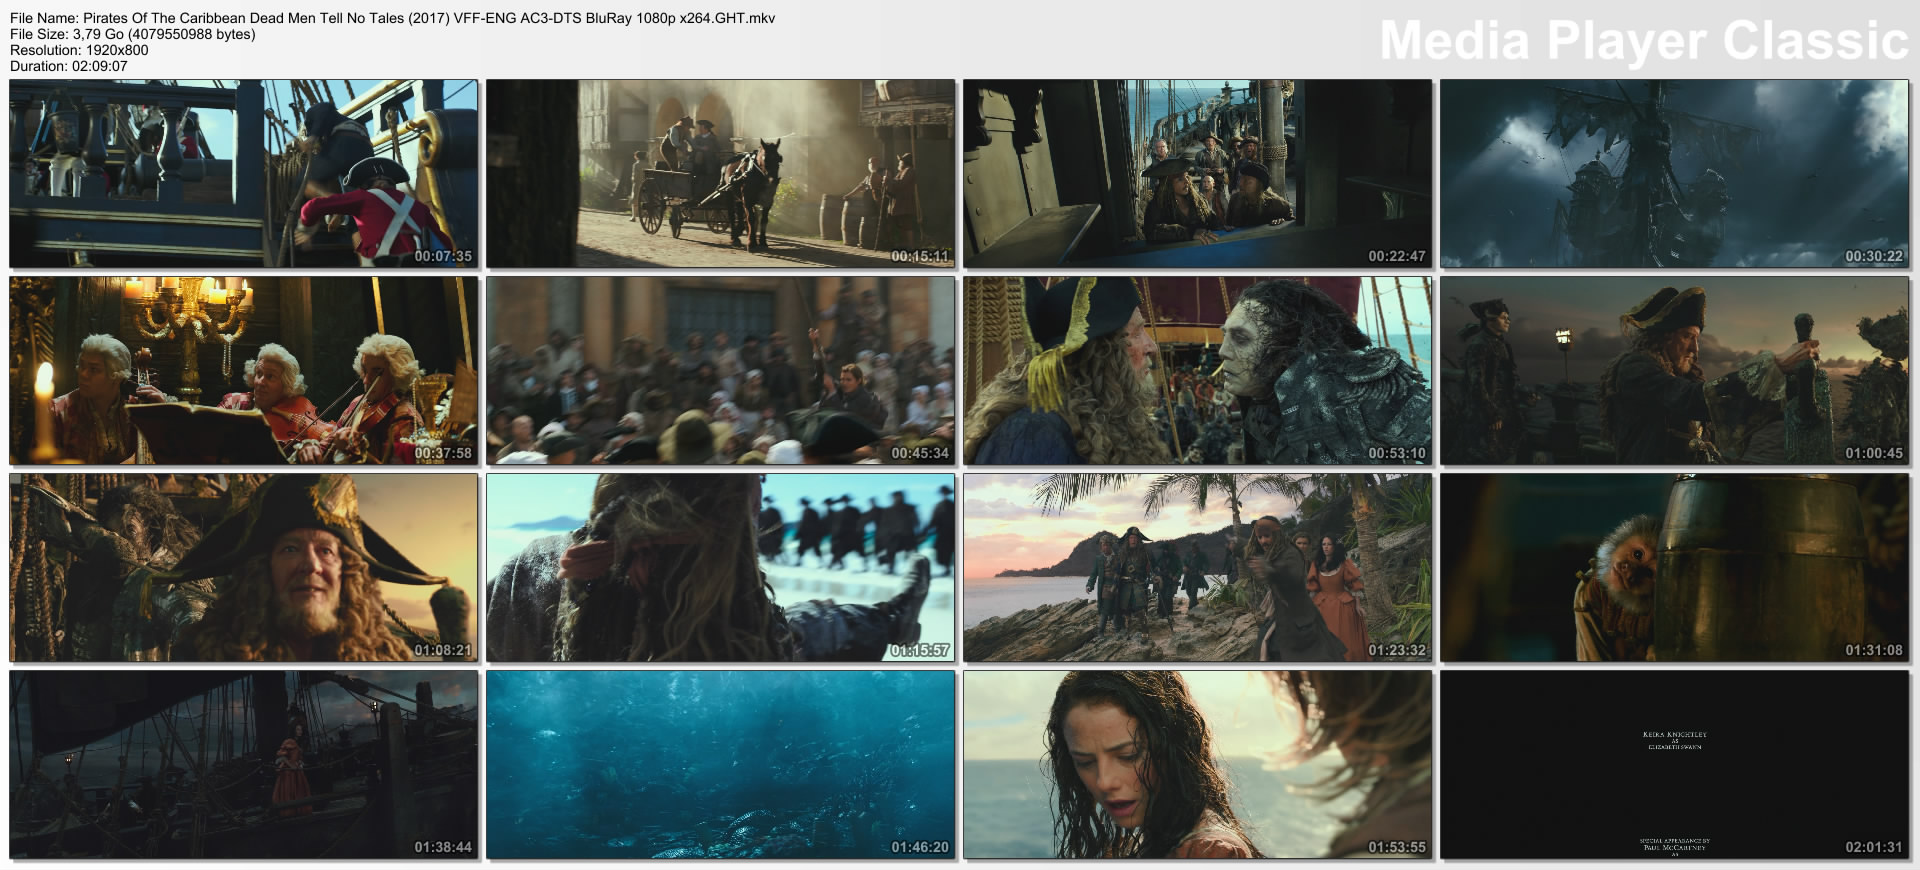 Pirates Of The Caribbean Dead Men Tell No Tales (2017) VFF-ENG AC3-DTS BluRay 1080p x264.GHT